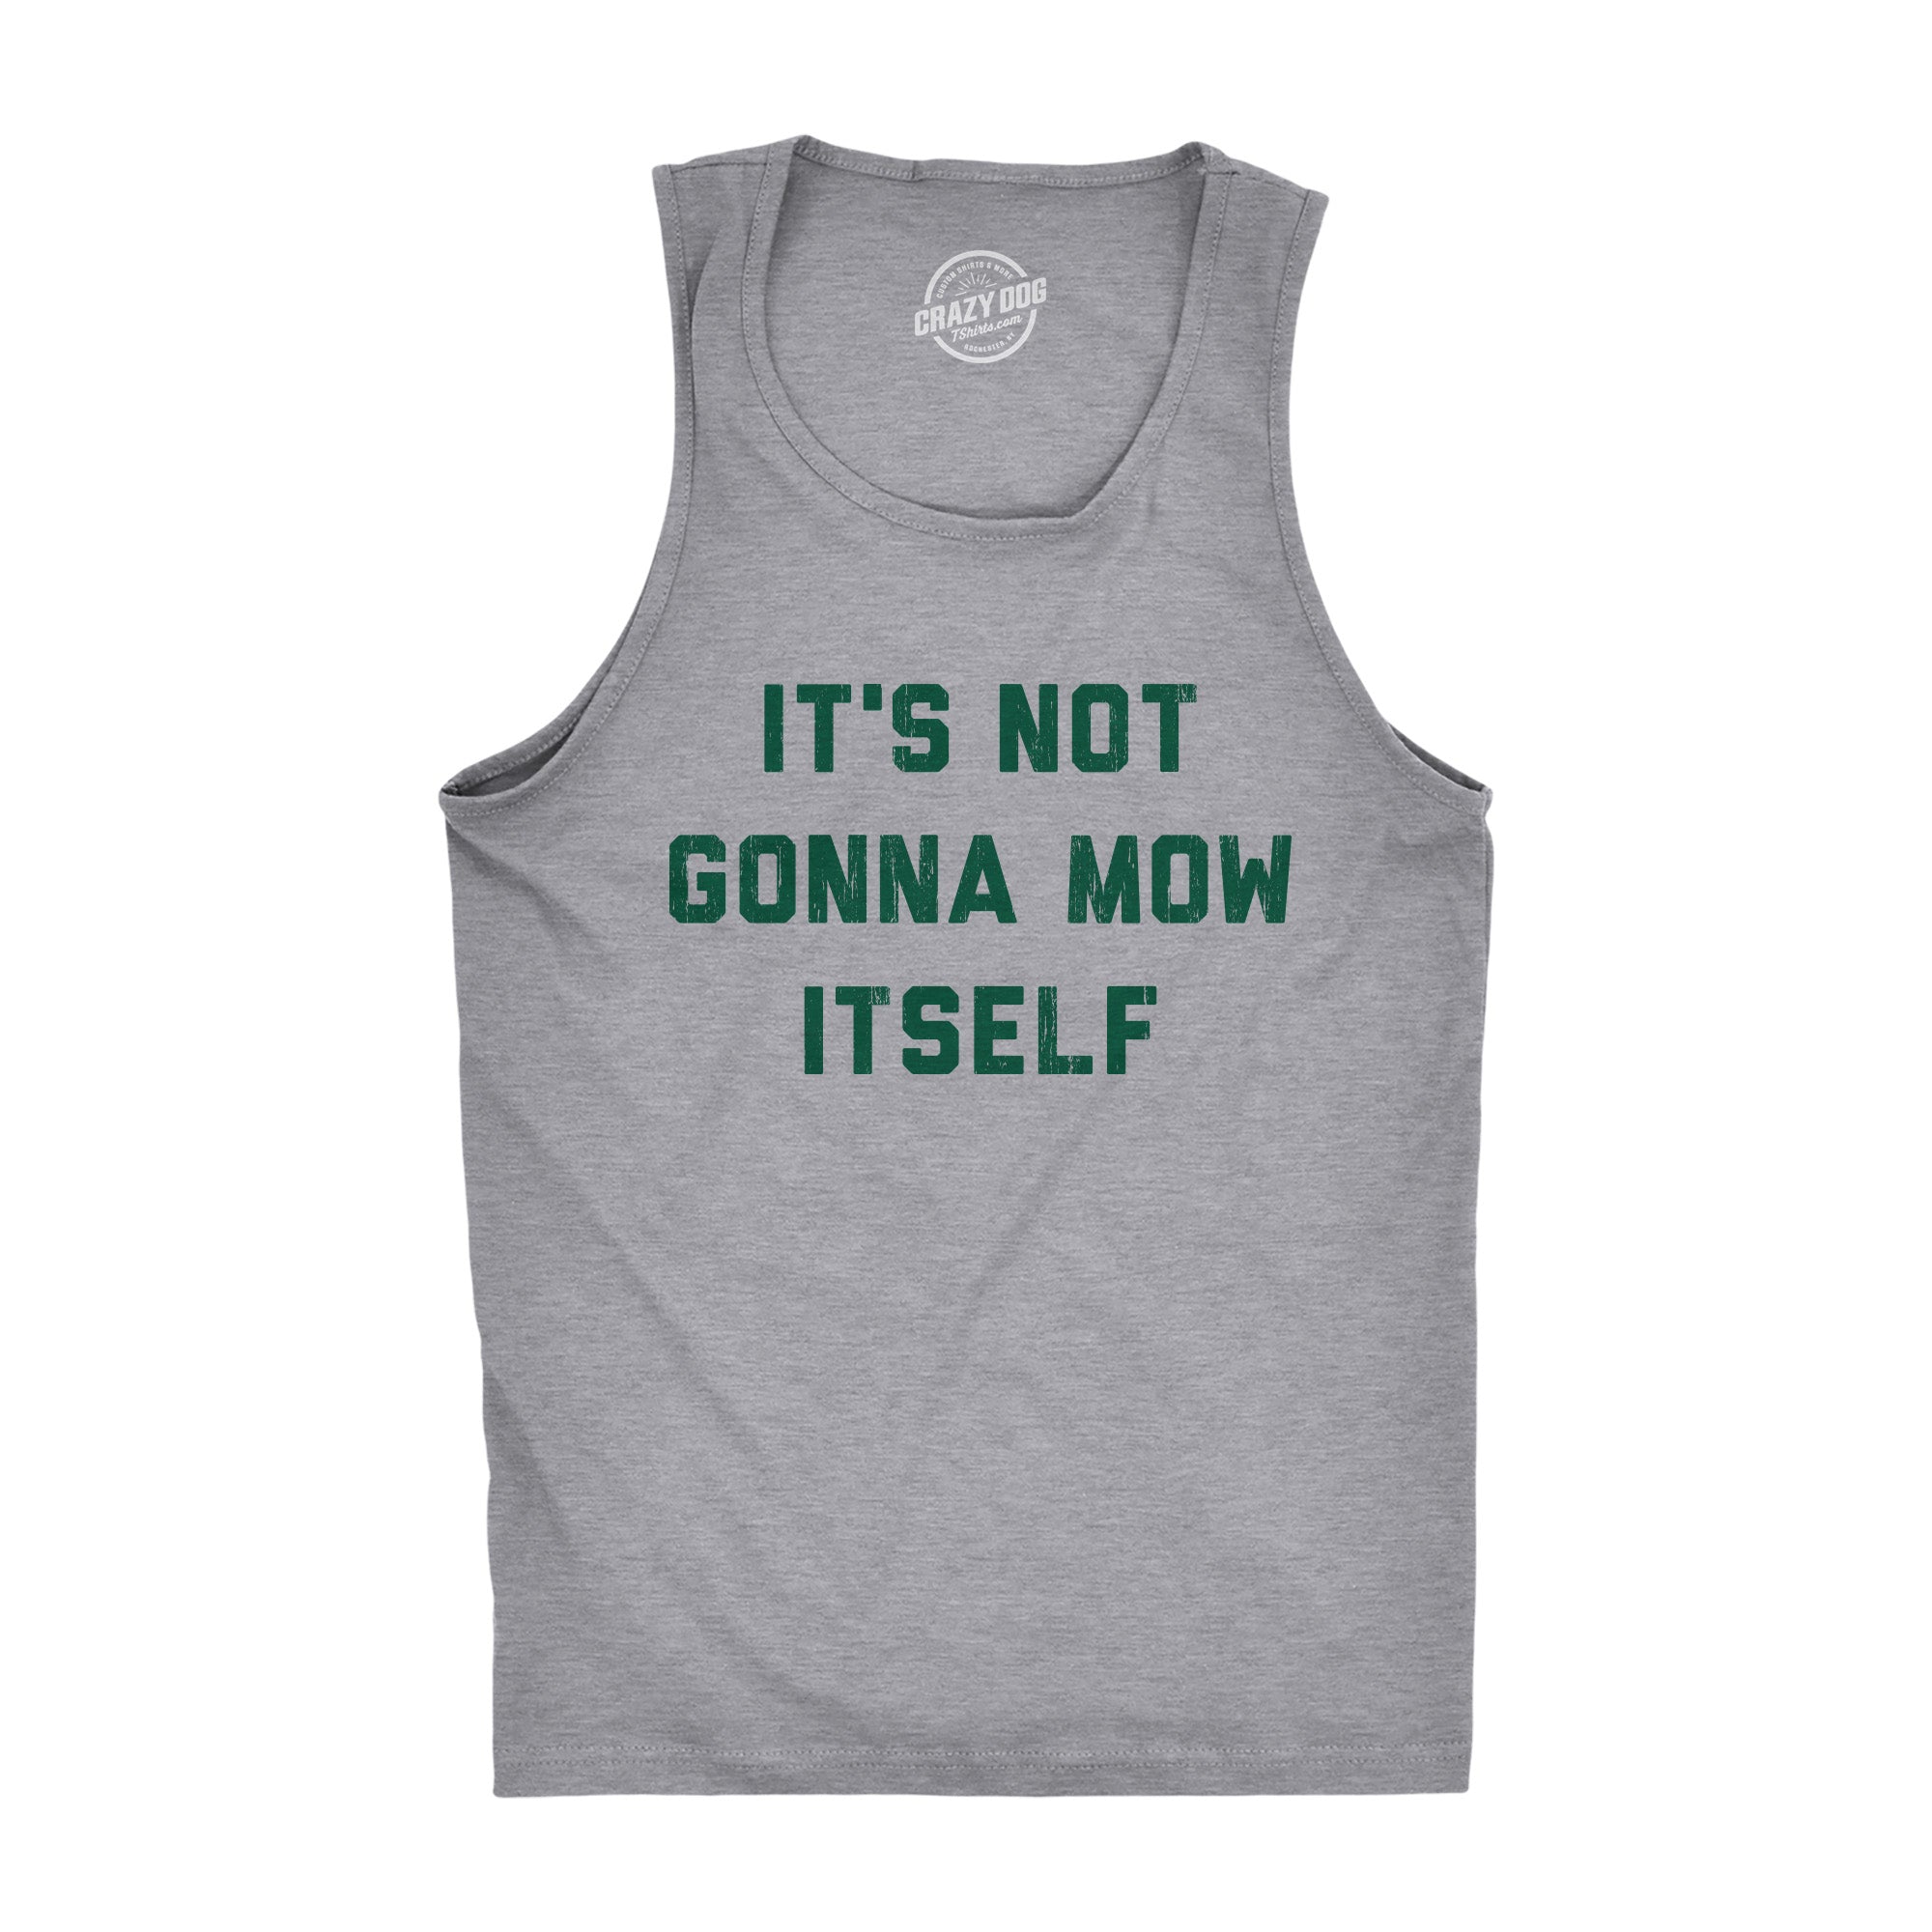 Funny Light Heather Grey - MOW Its Not Going To Mow Itself Mens Tank Top Nerdy Sarcastic Tee